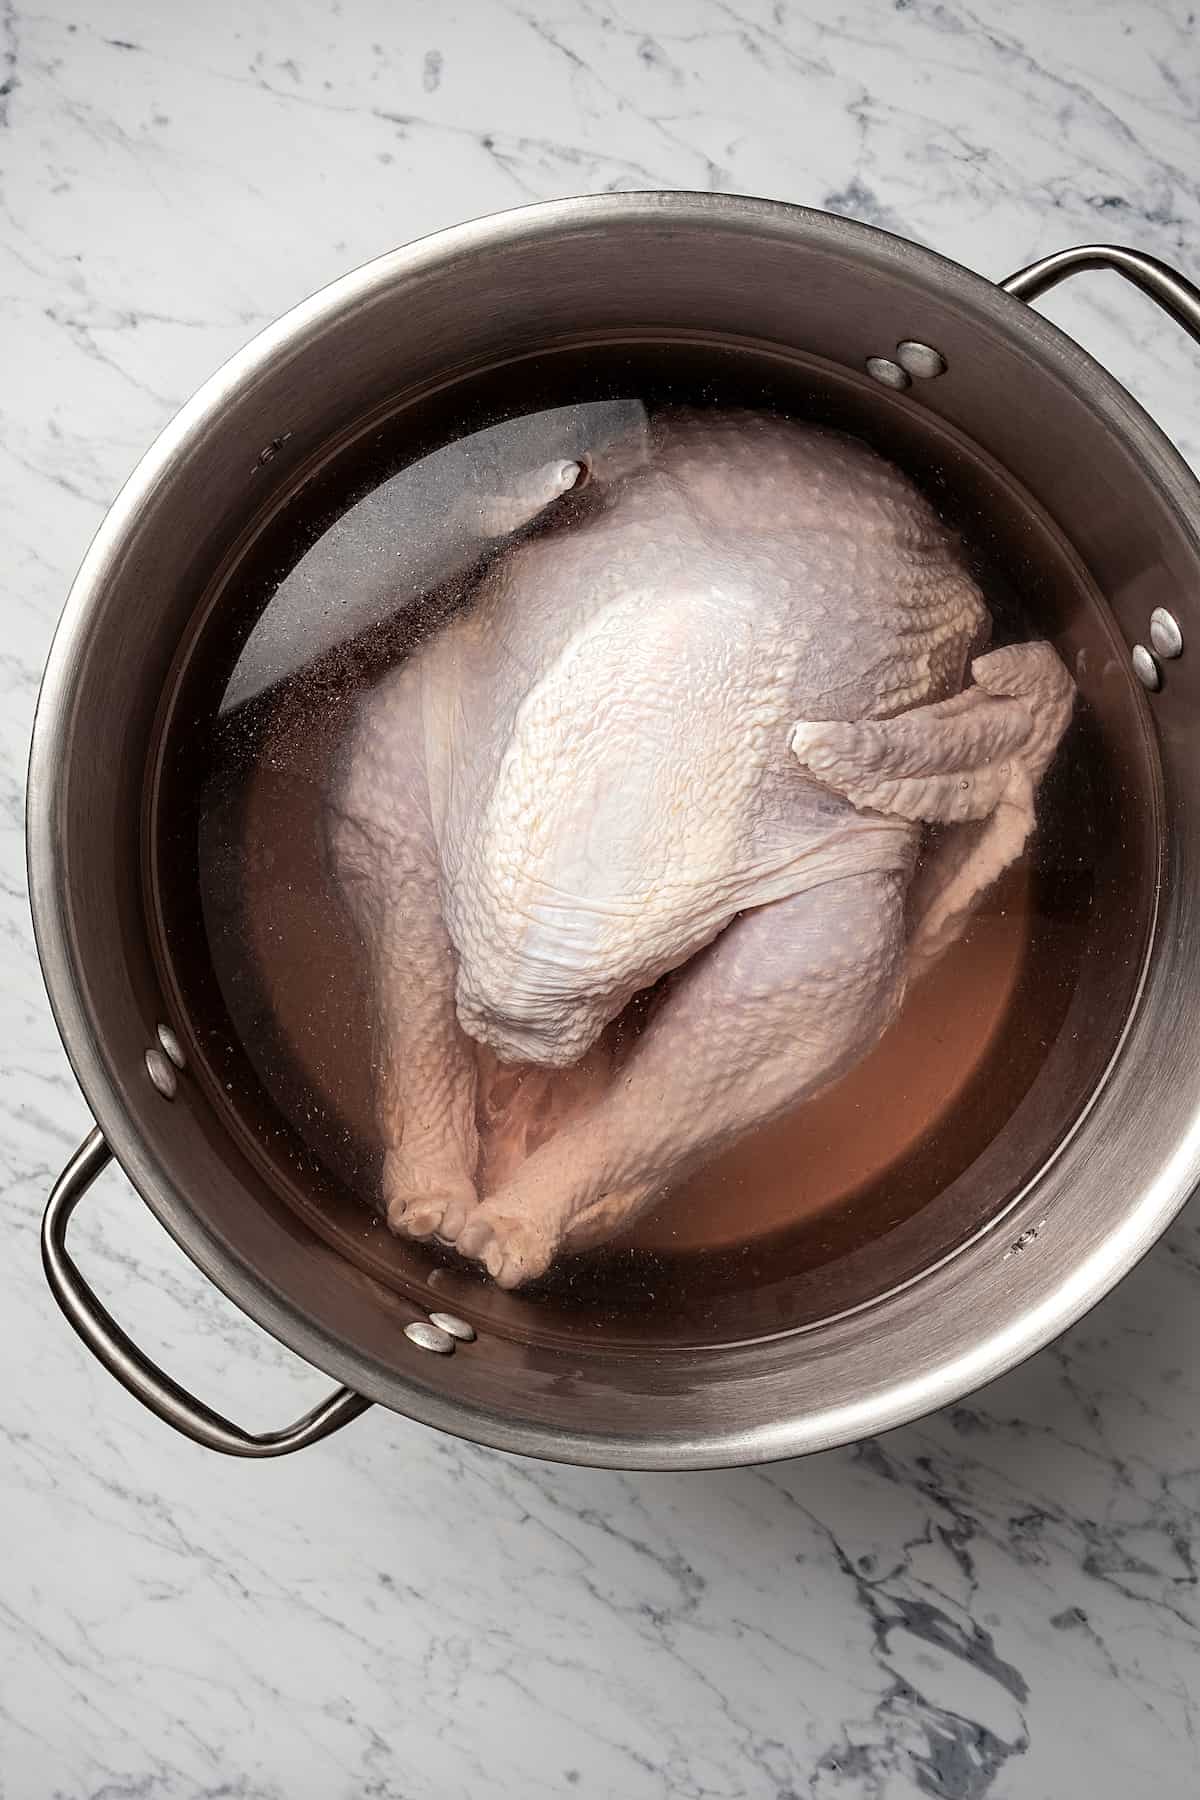 A whole turkey in a large stockpot of brine.